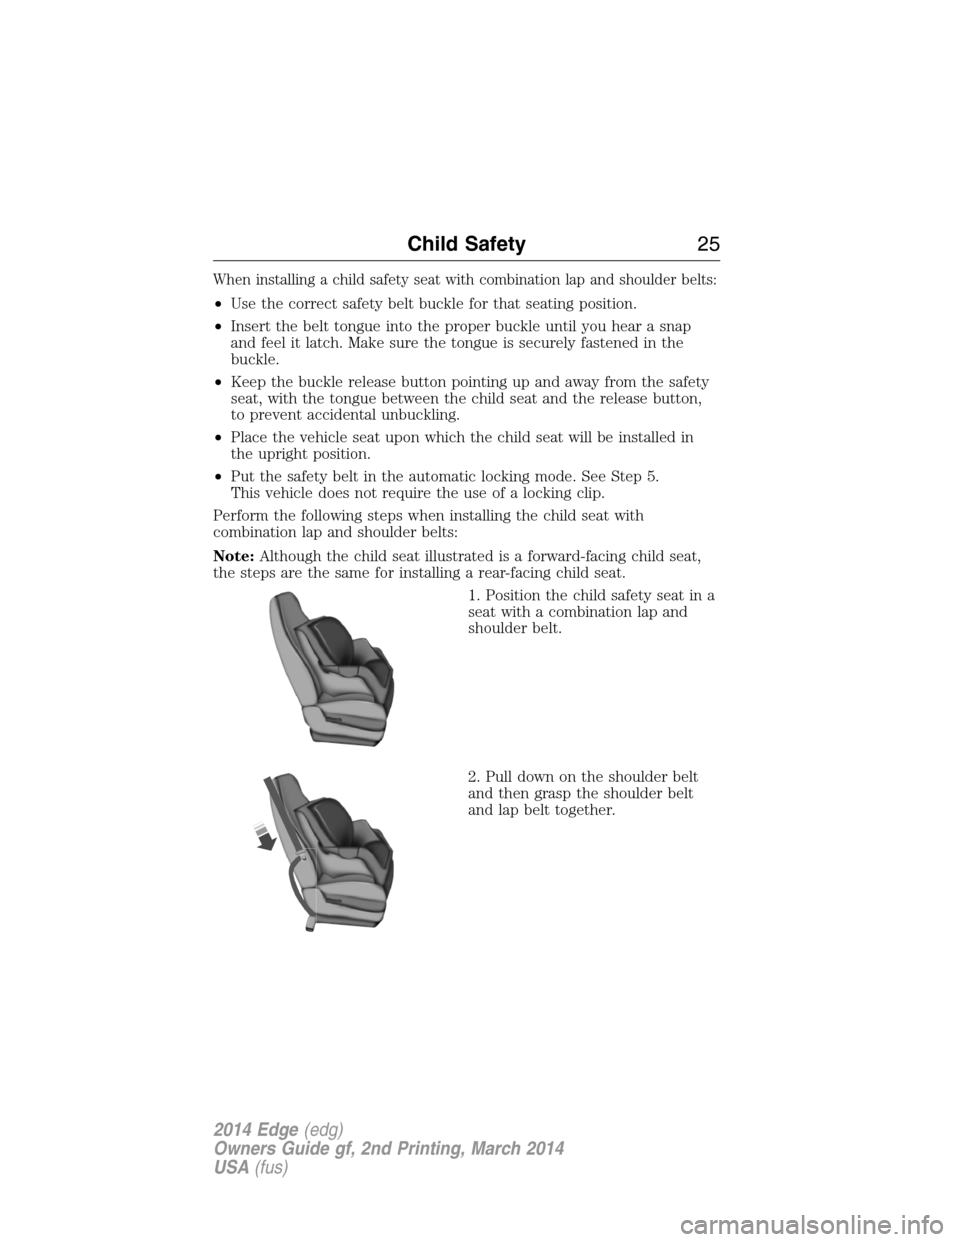 FORD EDGE 2014 1.G Owners Manual When installing a child safety seat with combination lap and shoulder belts:
•Use the correct safety belt buckle for that seating position.
•Insert the belt tongue into the proper buckle until you